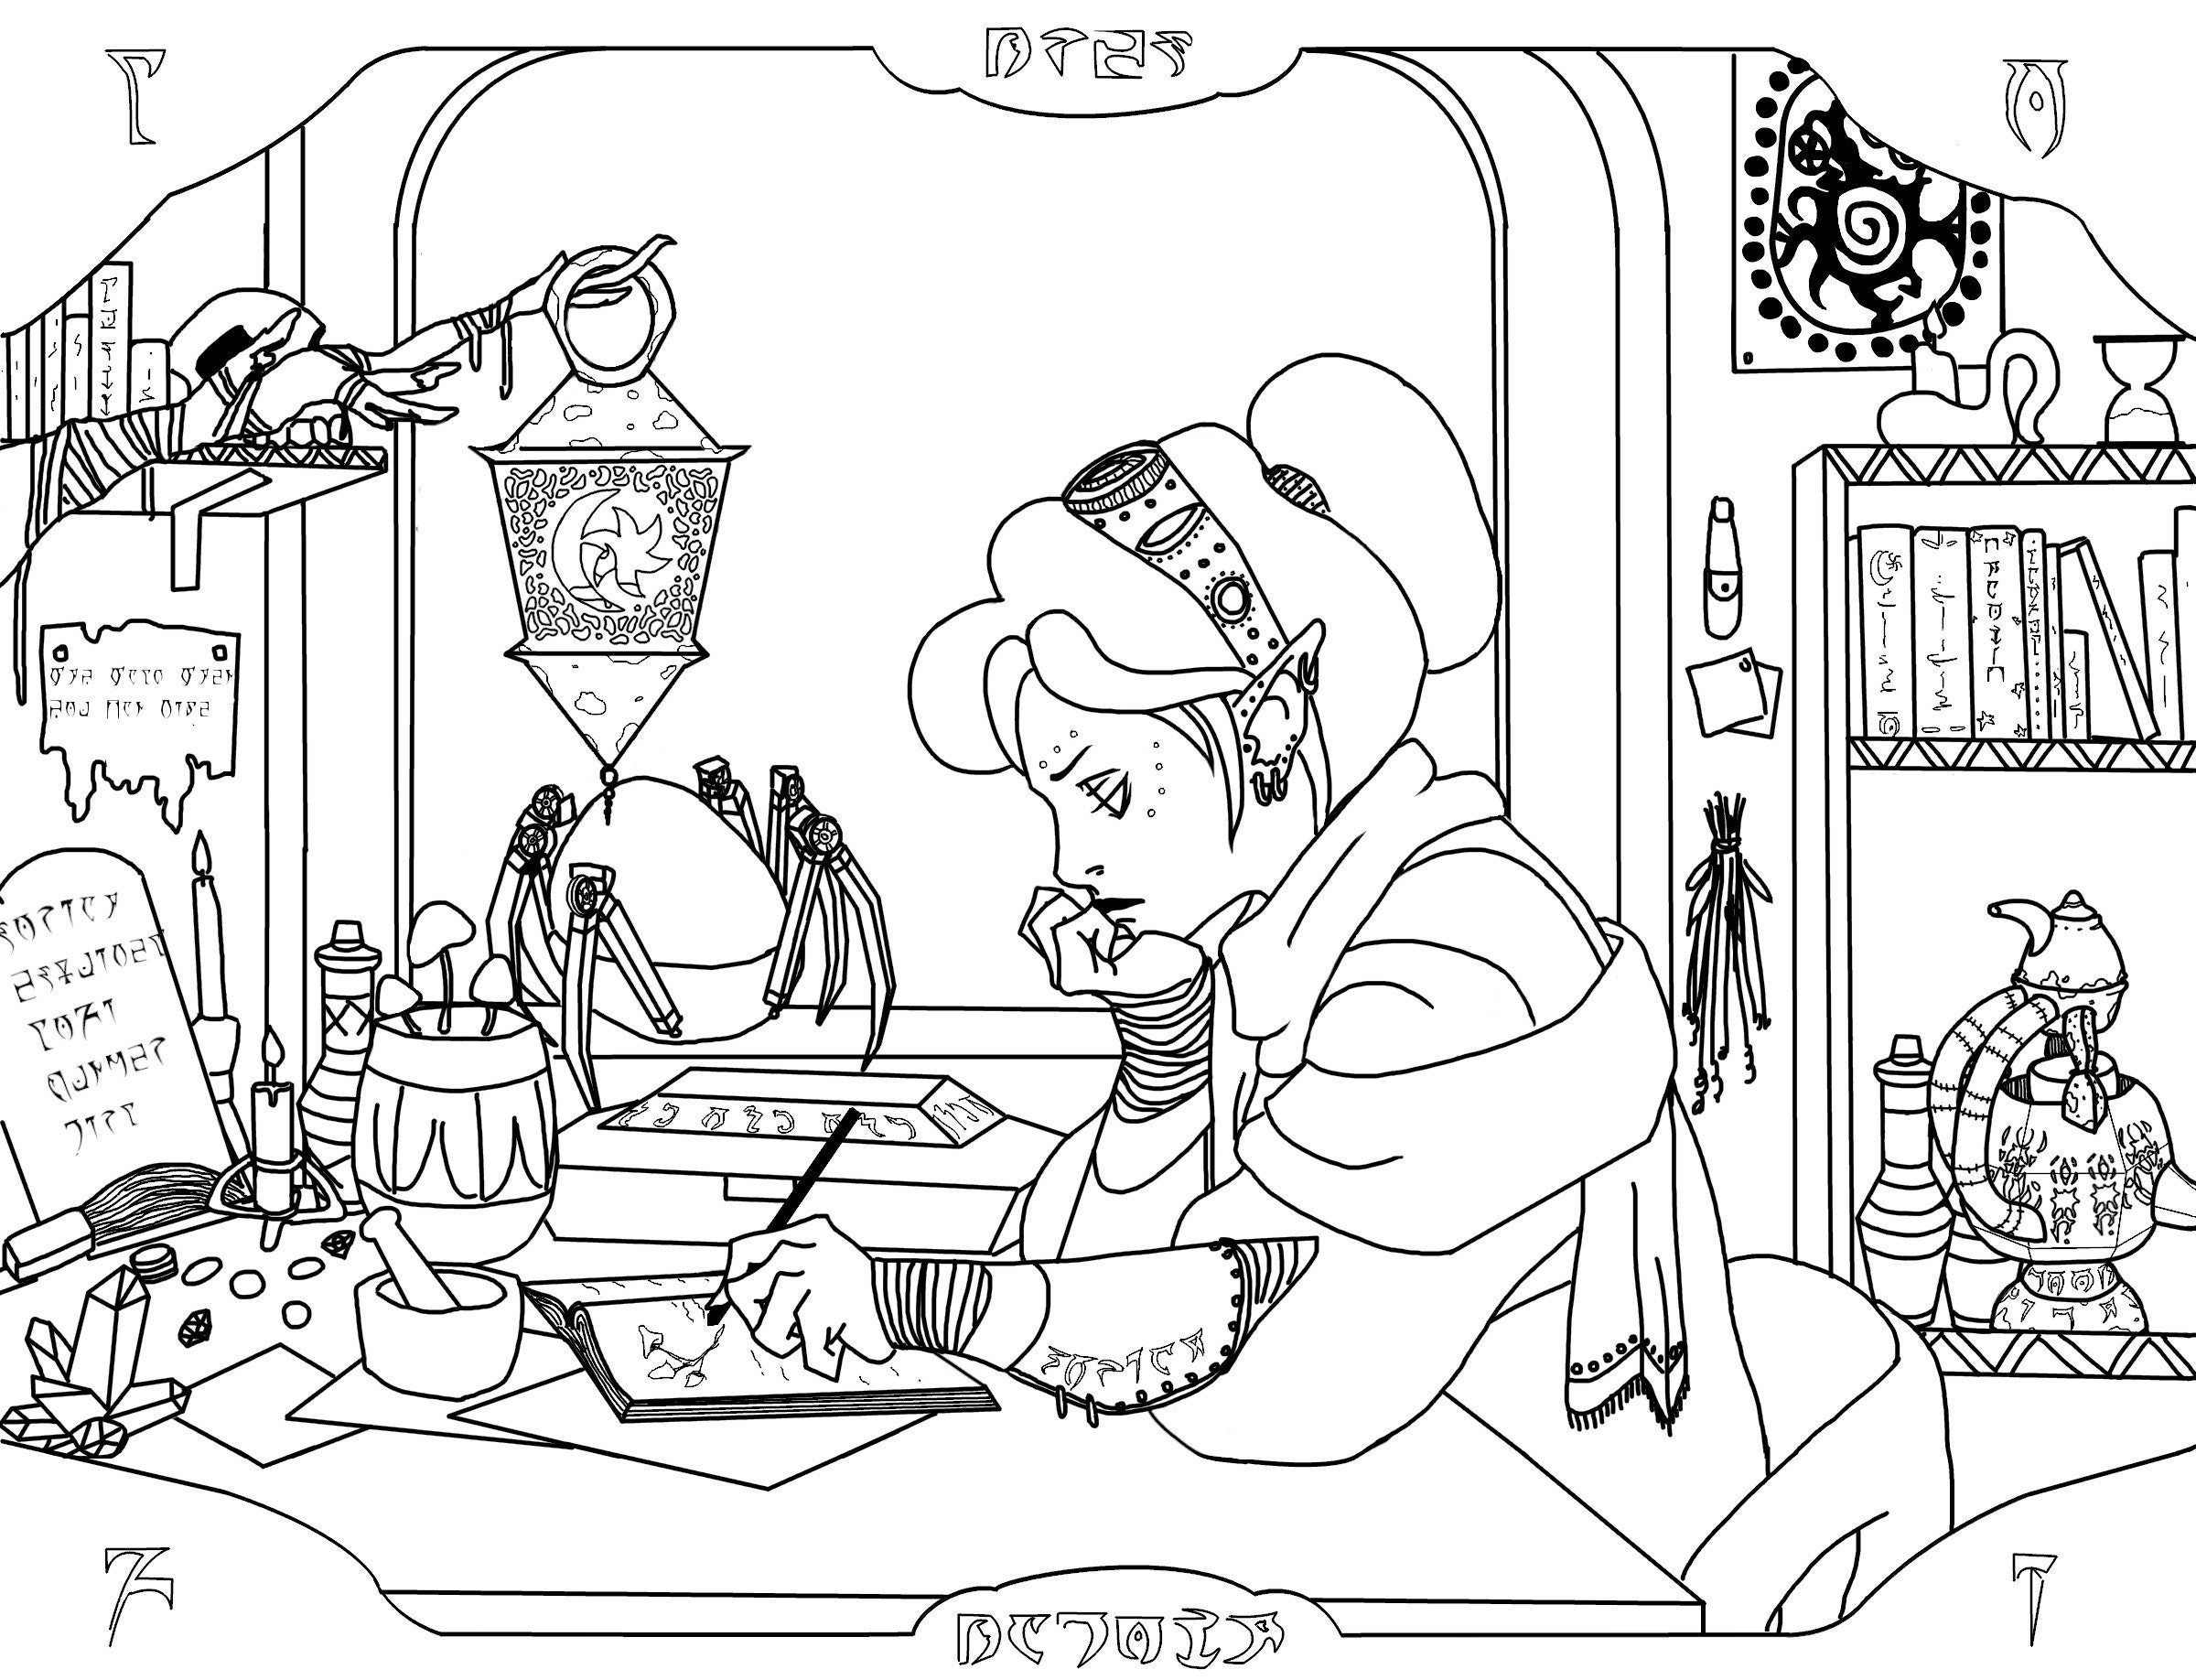 The Elder Scrolls: Lo-fi Dunmer Girl Coloring Page - Etsy